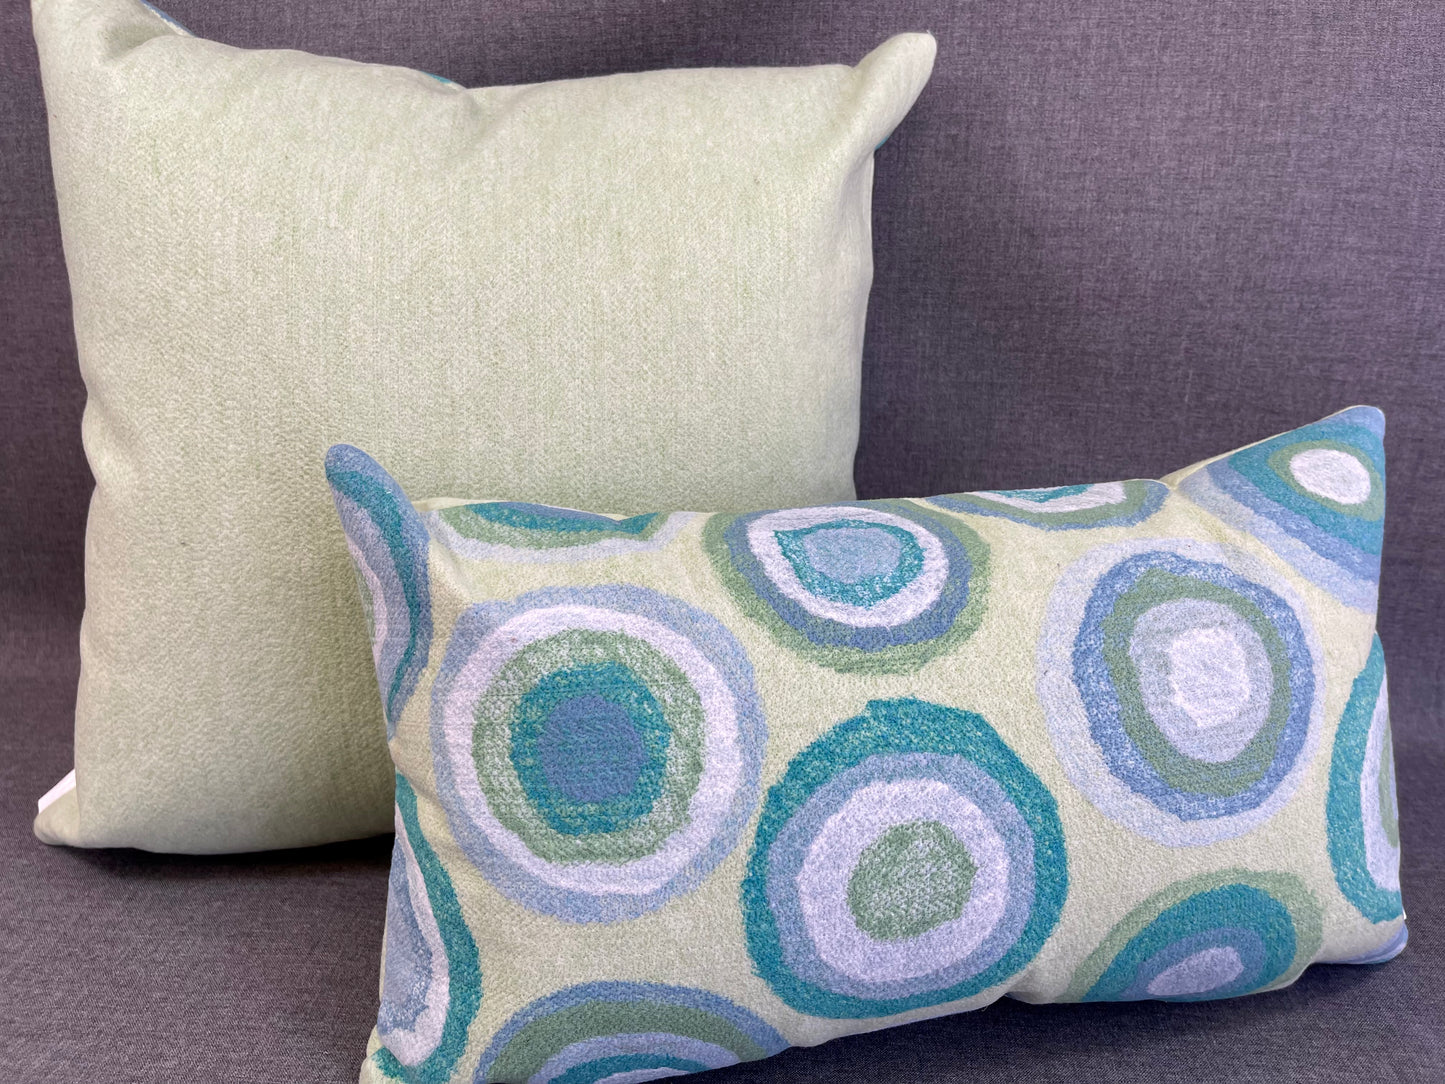 Outdoor Pillow - 18" x 18" - Lillypad; Circles of Green, White and Turquoise on a yellow/green background